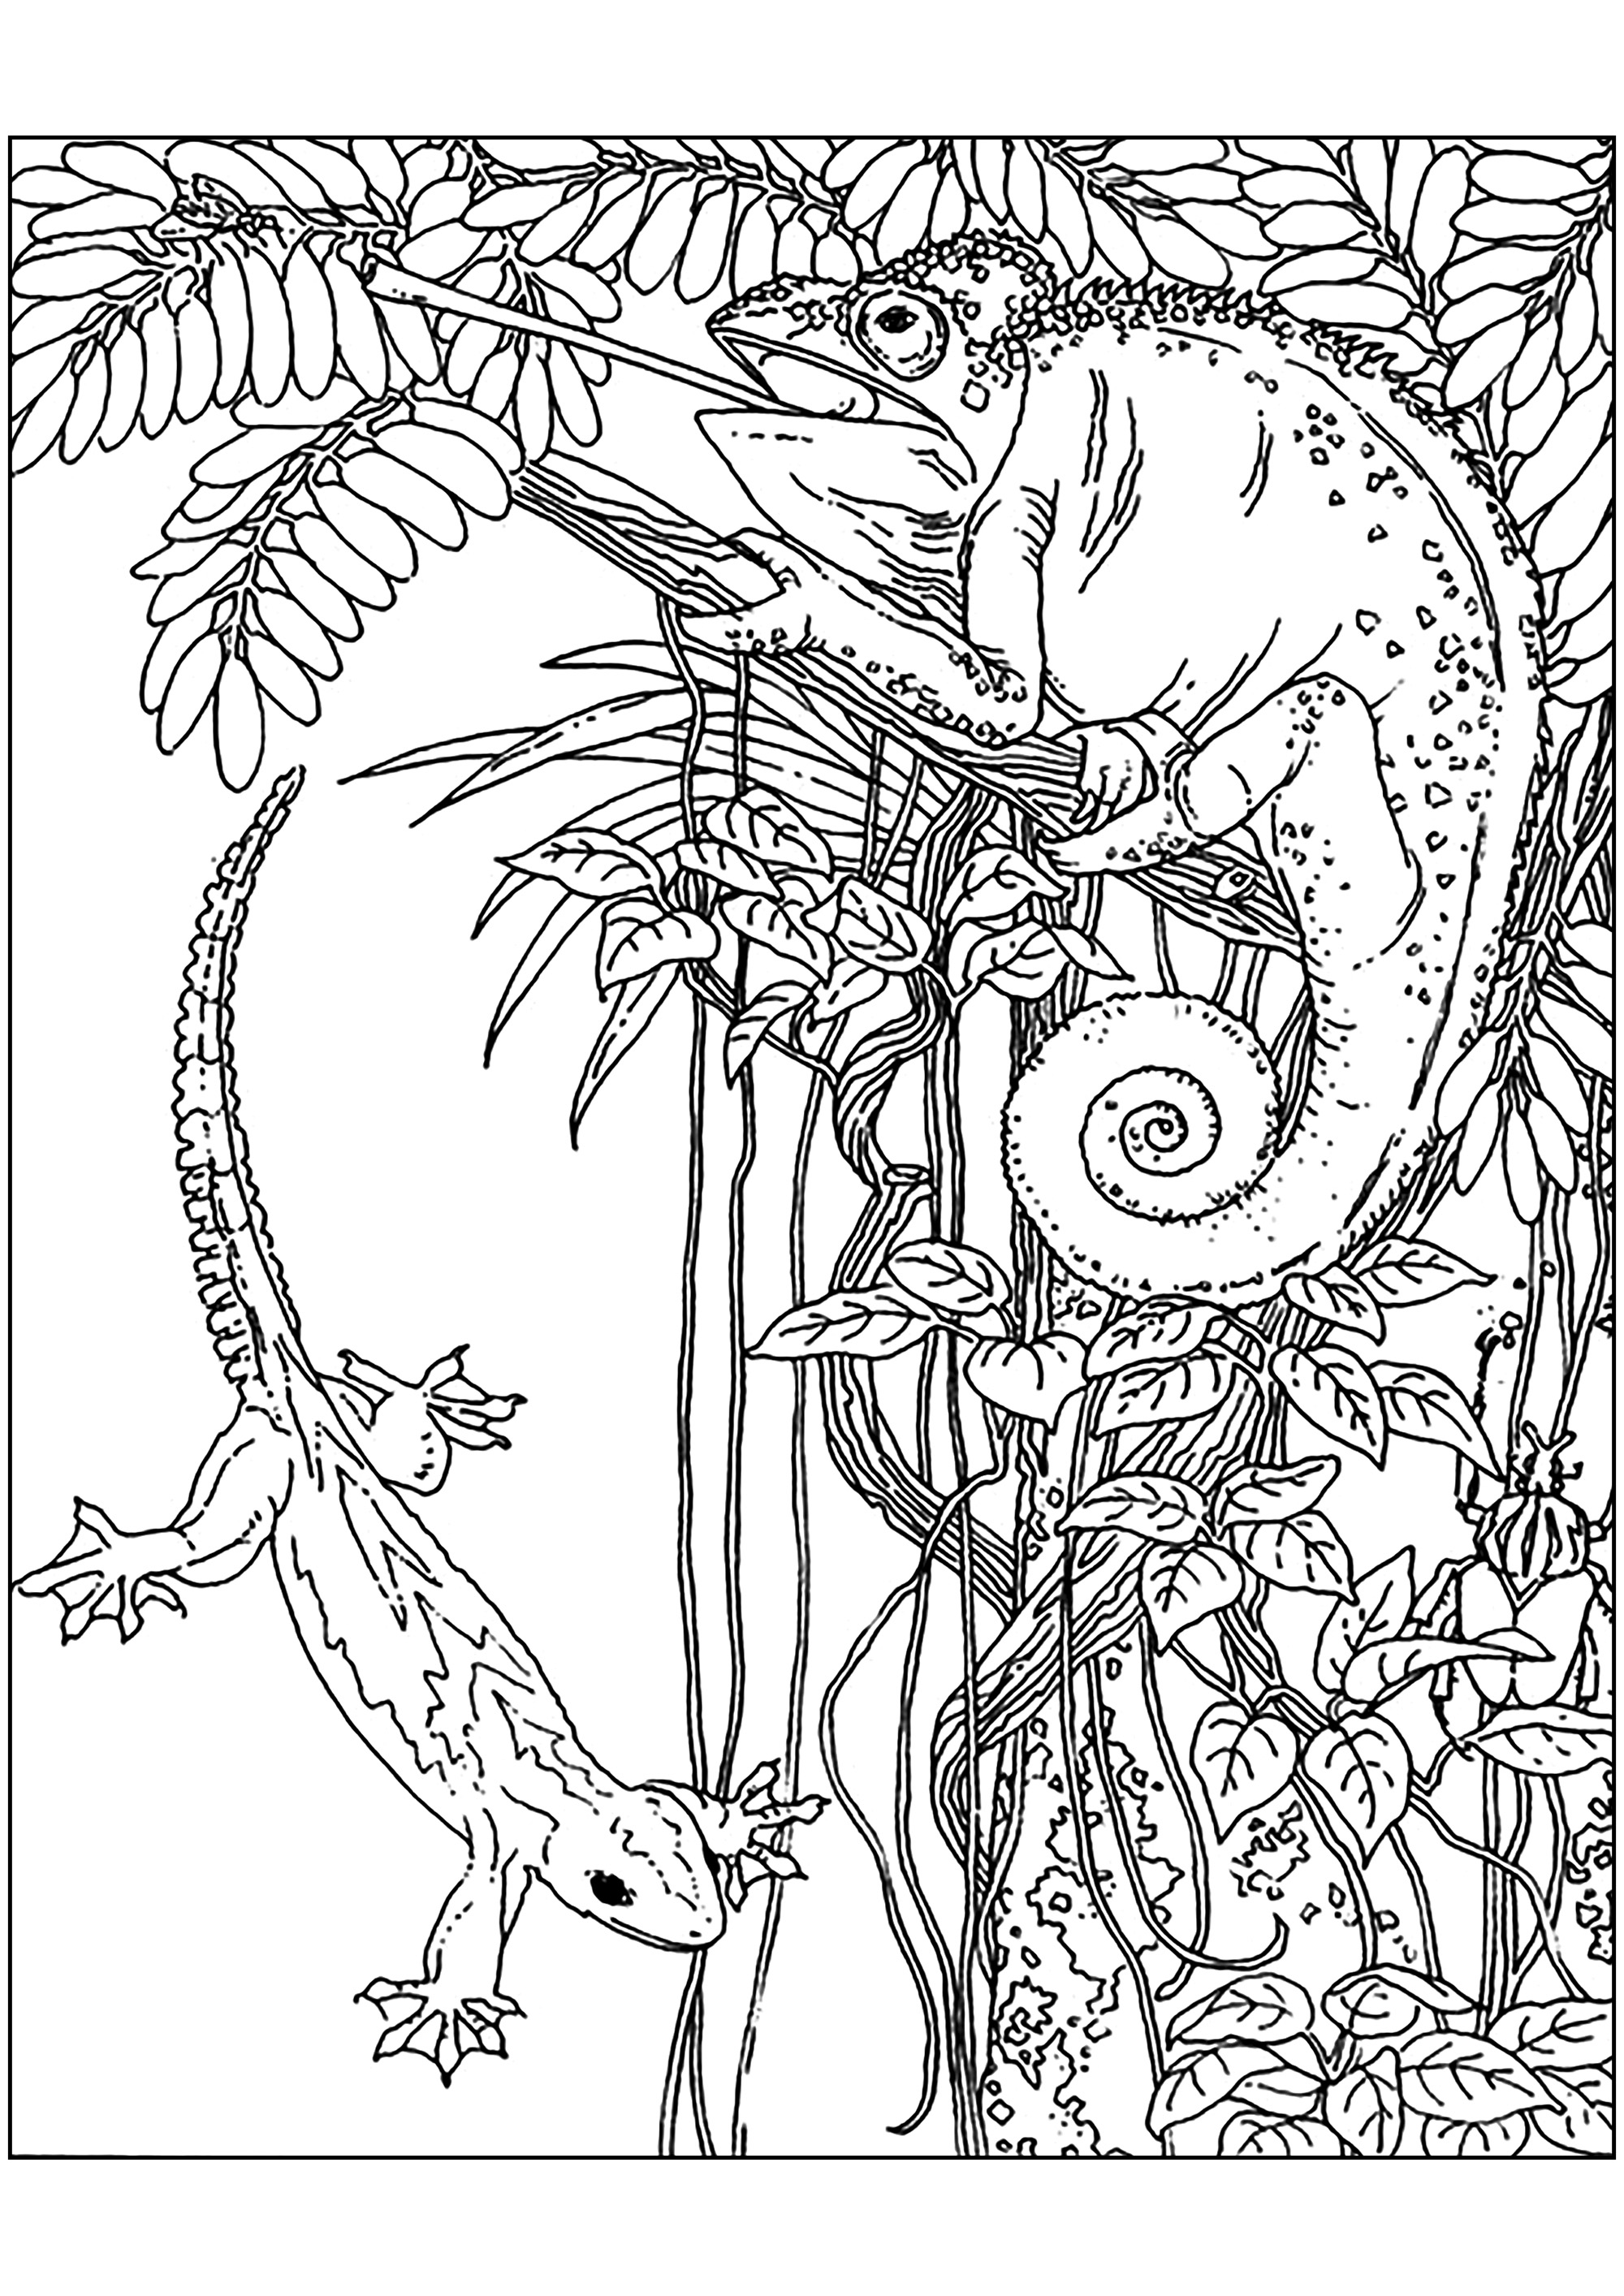 Cameleon and lizard - Chameleons & lizards Adult Coloring Pages